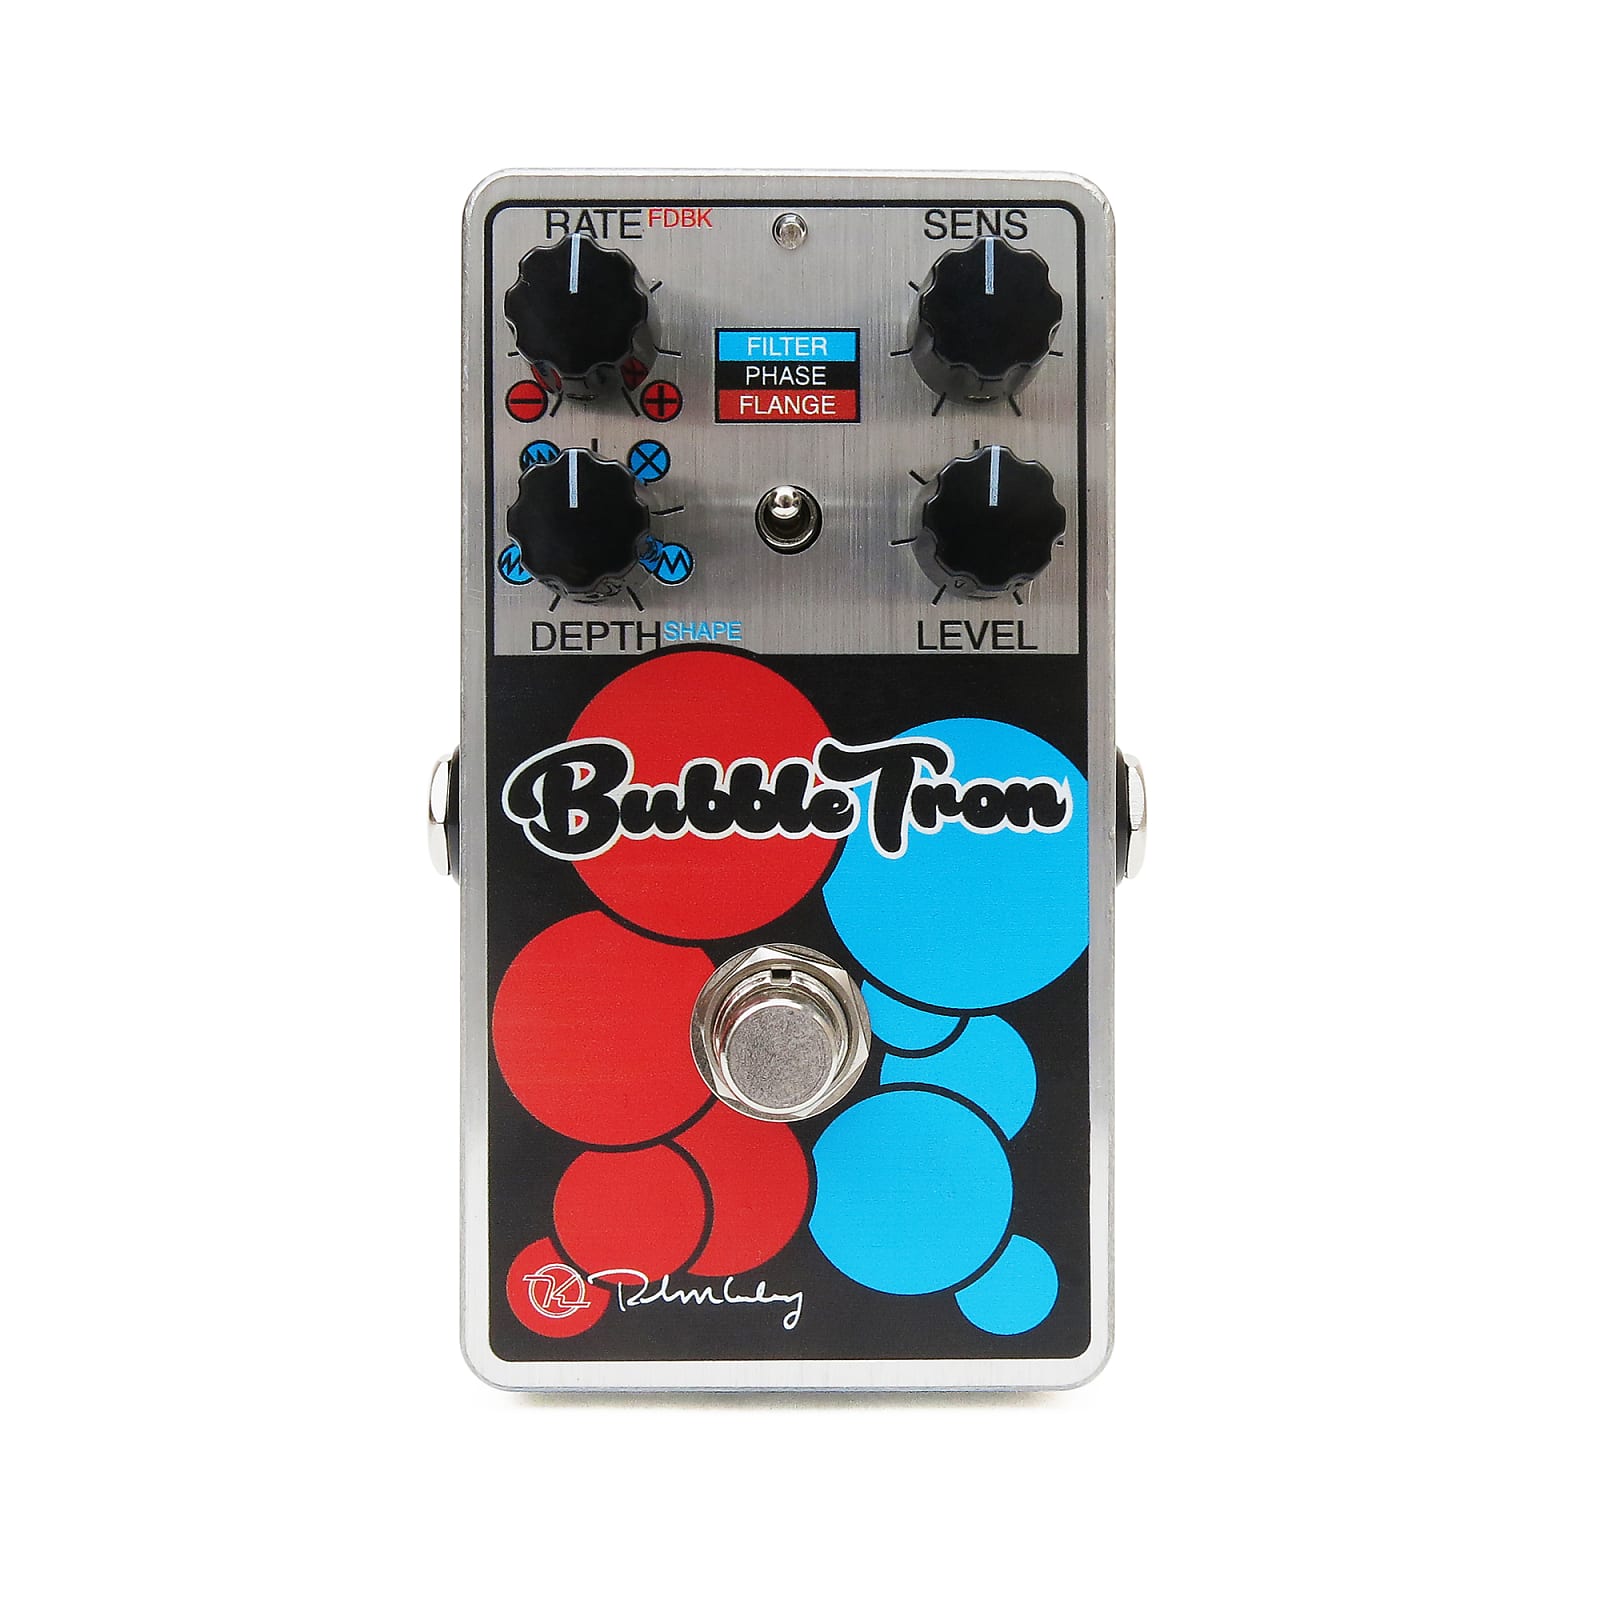 Keeley Bubble Tron Dynamic Flanger / Phaser / Filter Effects Pedal